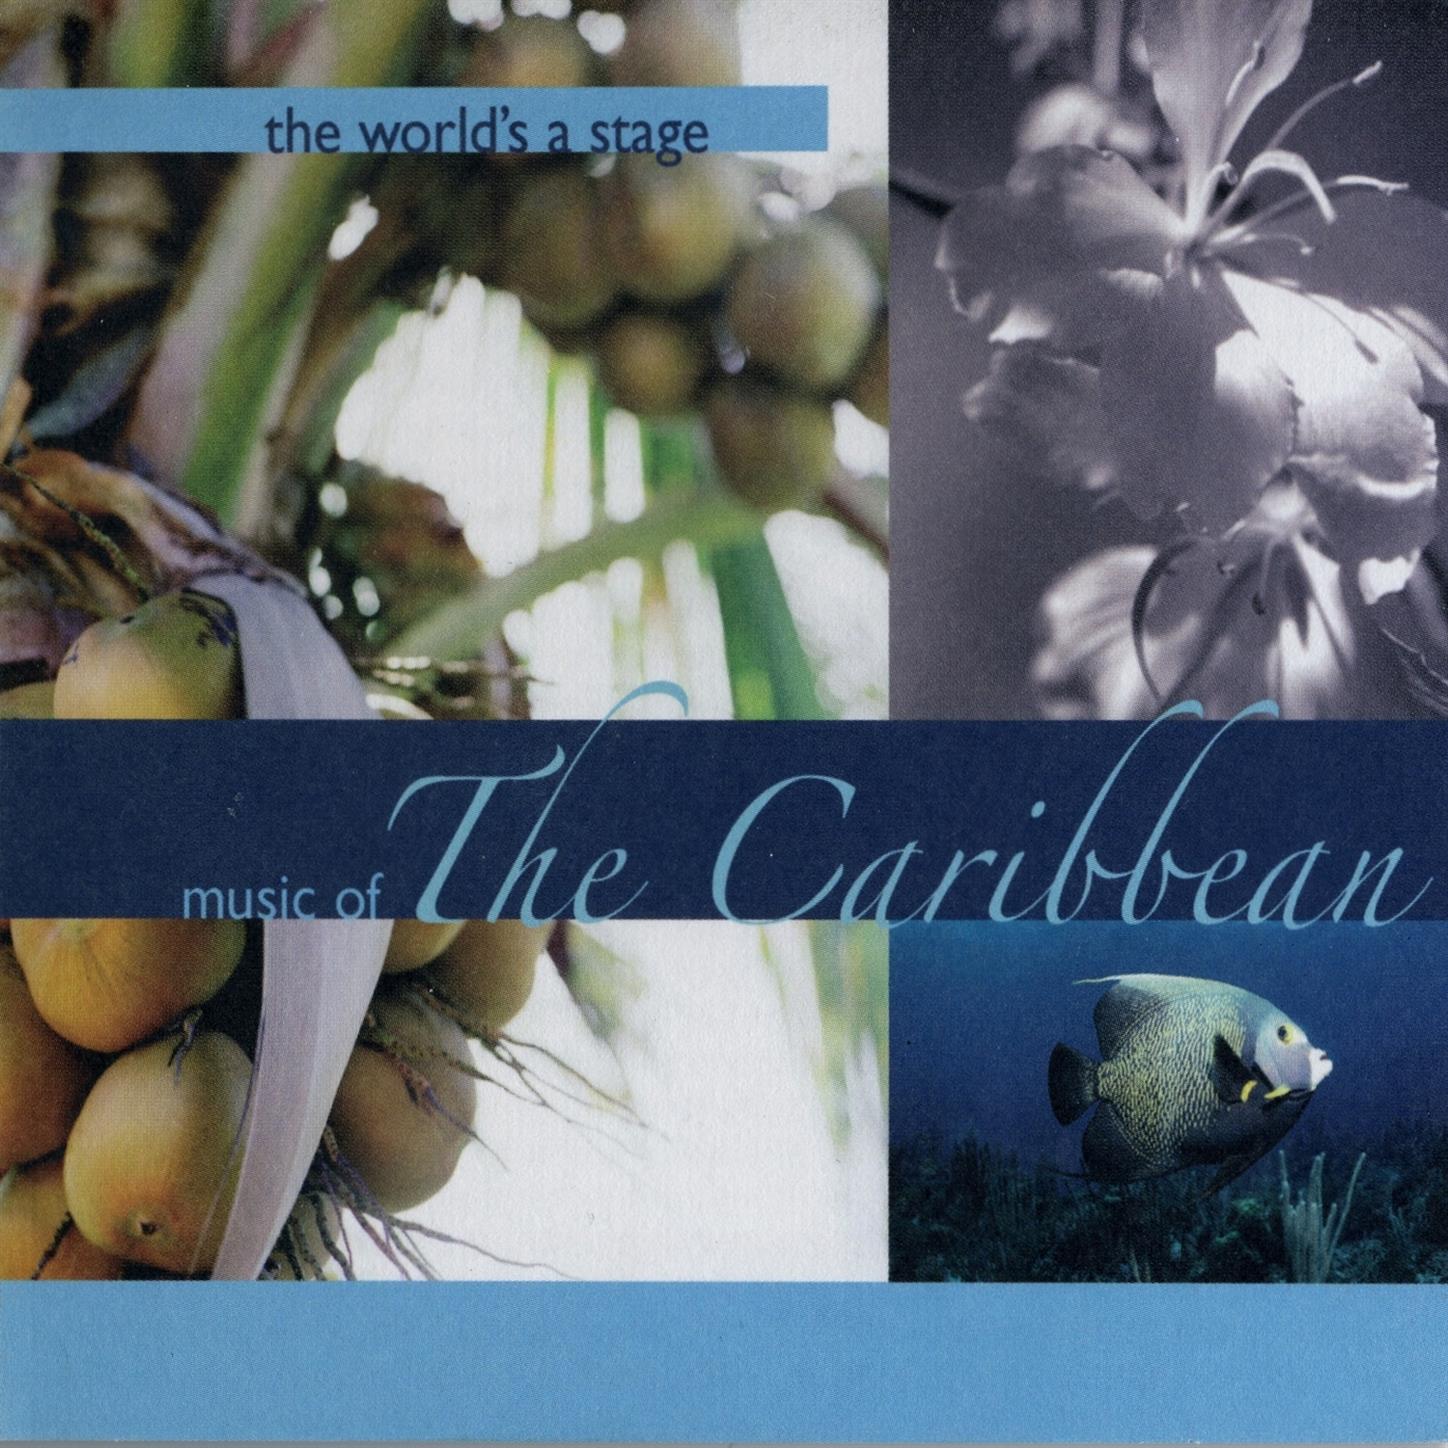 The World's a Stage - Music of the Carribbean